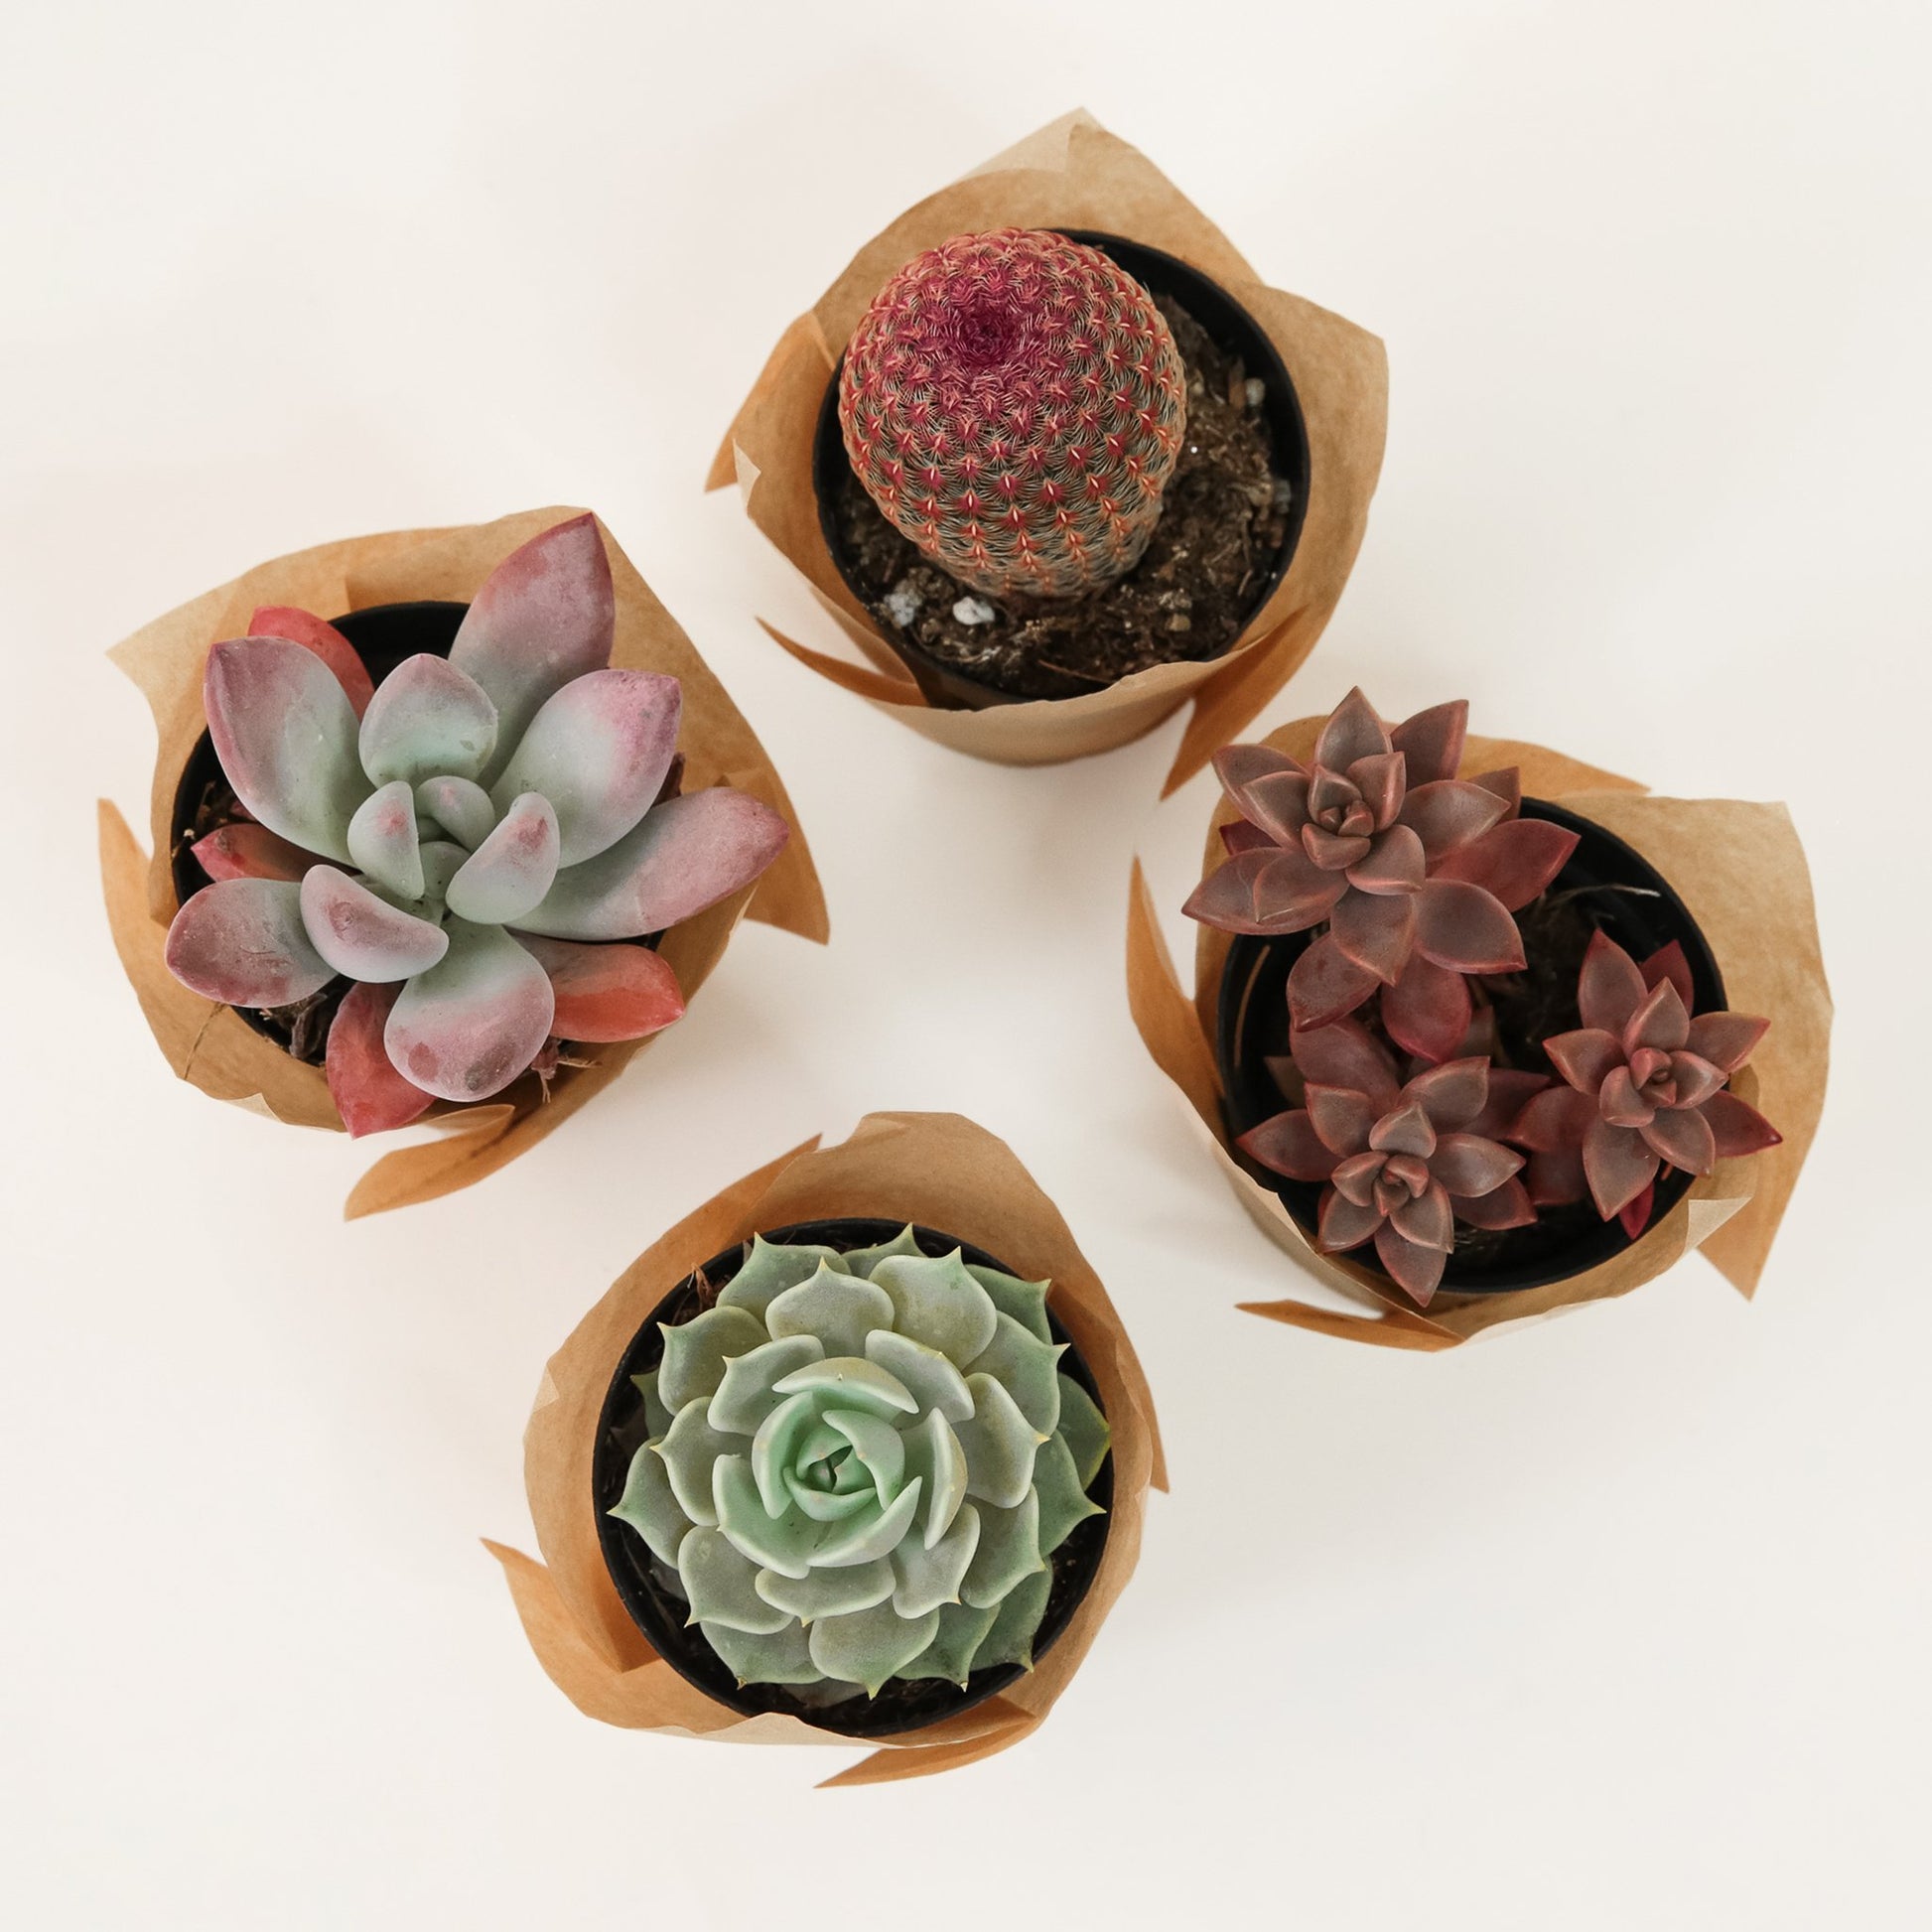 Four individual 2 inch succulents of various shapes and sizes. Each succulent container is wrapped in brown craft paper.